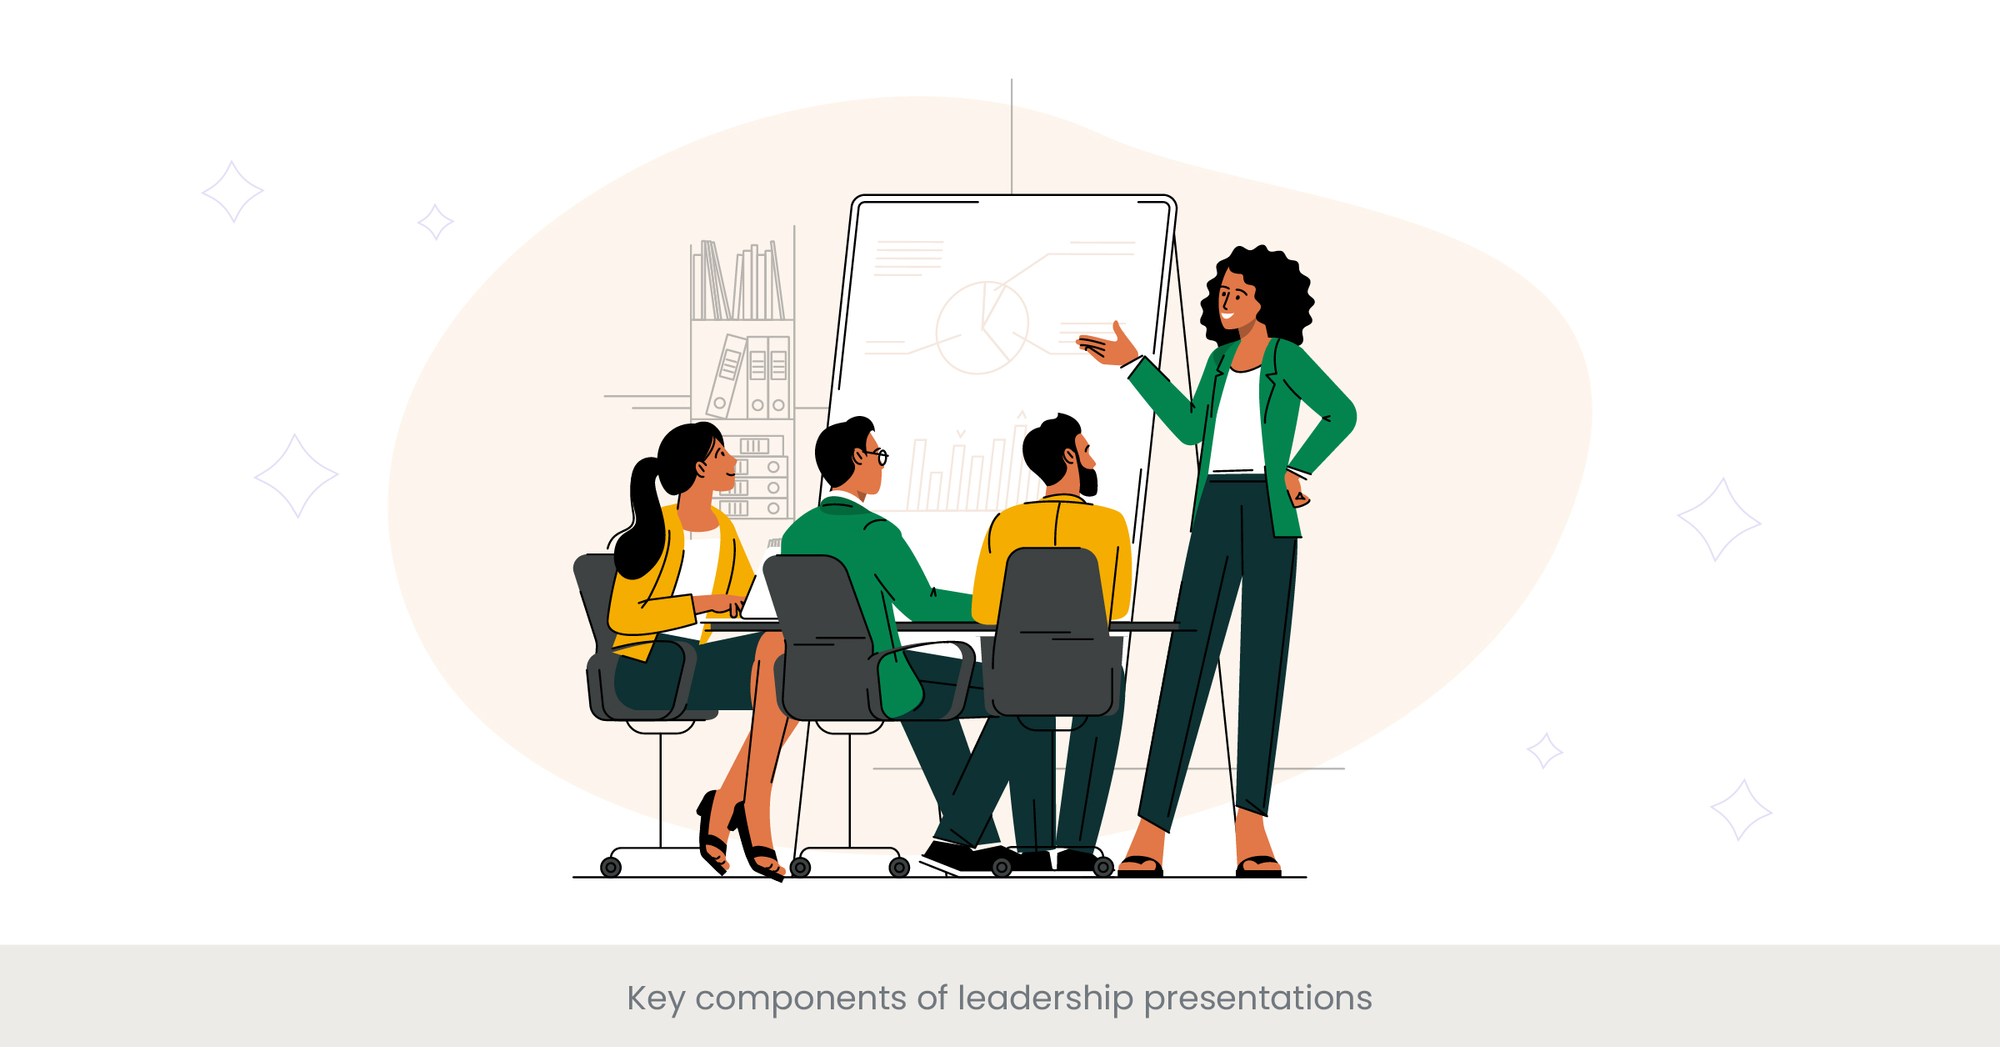 A Complete Guide on Leadership Presentations